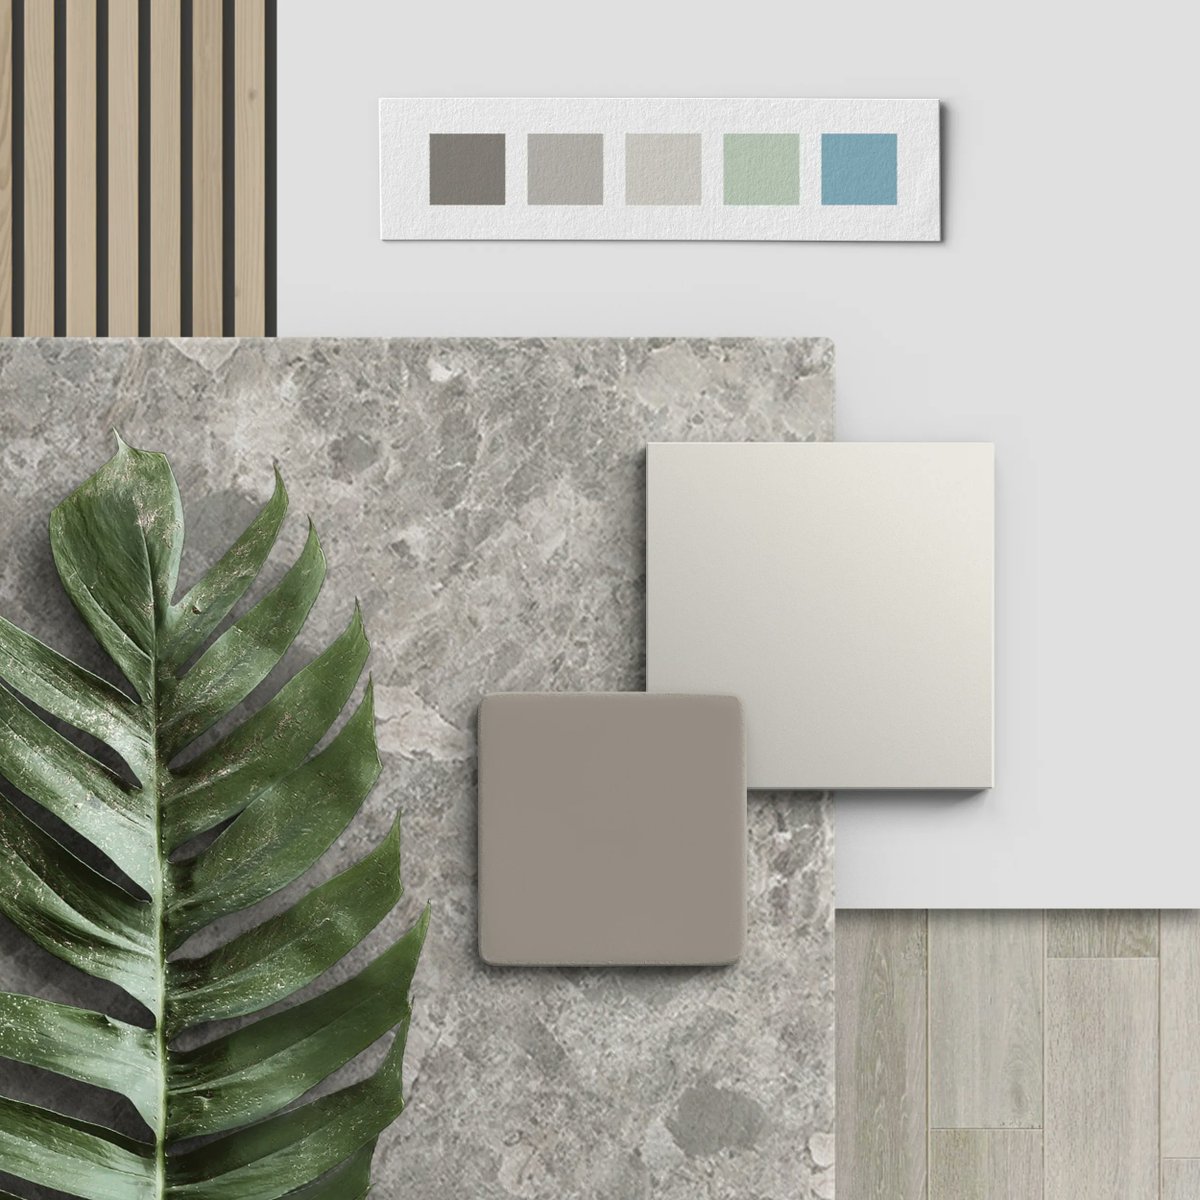 We've gone for a light and airy theme for this month's moodboard, what do you think?  
#Moodboards #LightAndBright #InteriorInspiration #DesignIdeas #FreshInteriors #CleanAesthetics #AirySpaces #NeutralPalette #MinimalistVibes #SereneAmbiance #LuminousDecor #SunlitSpaces